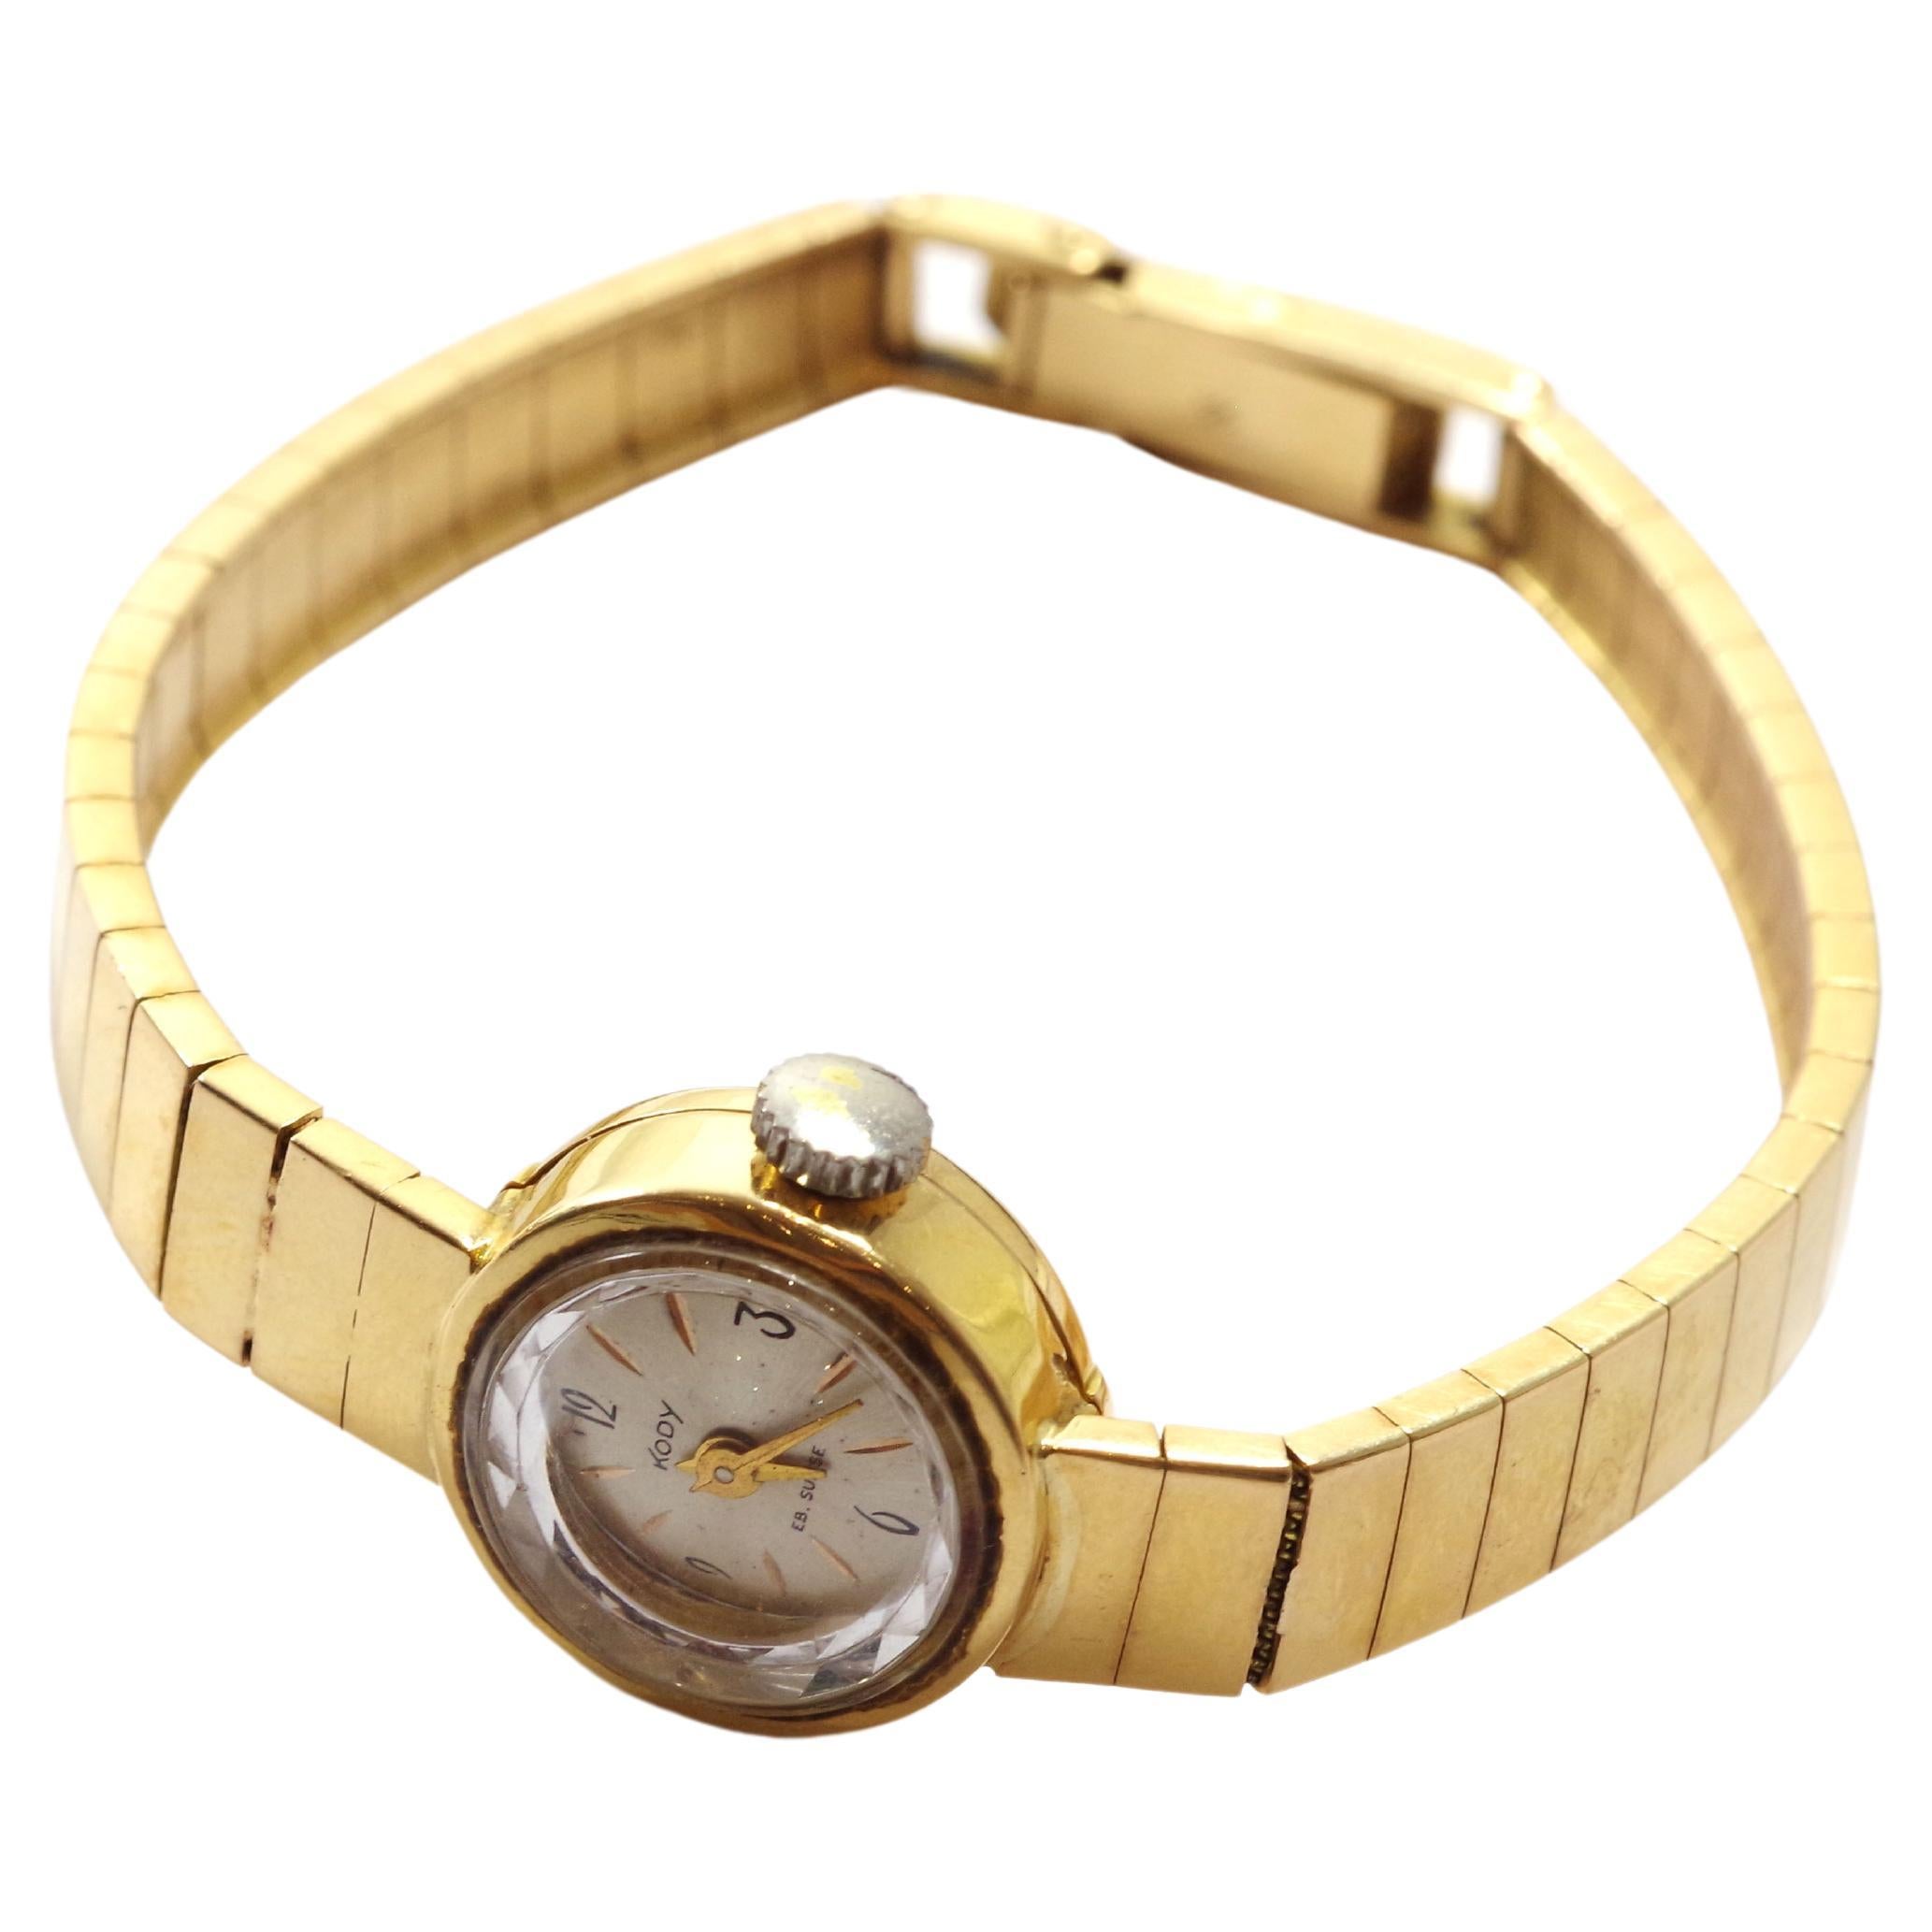 Lady Kody gold watch in 18k yellow gold For Sale